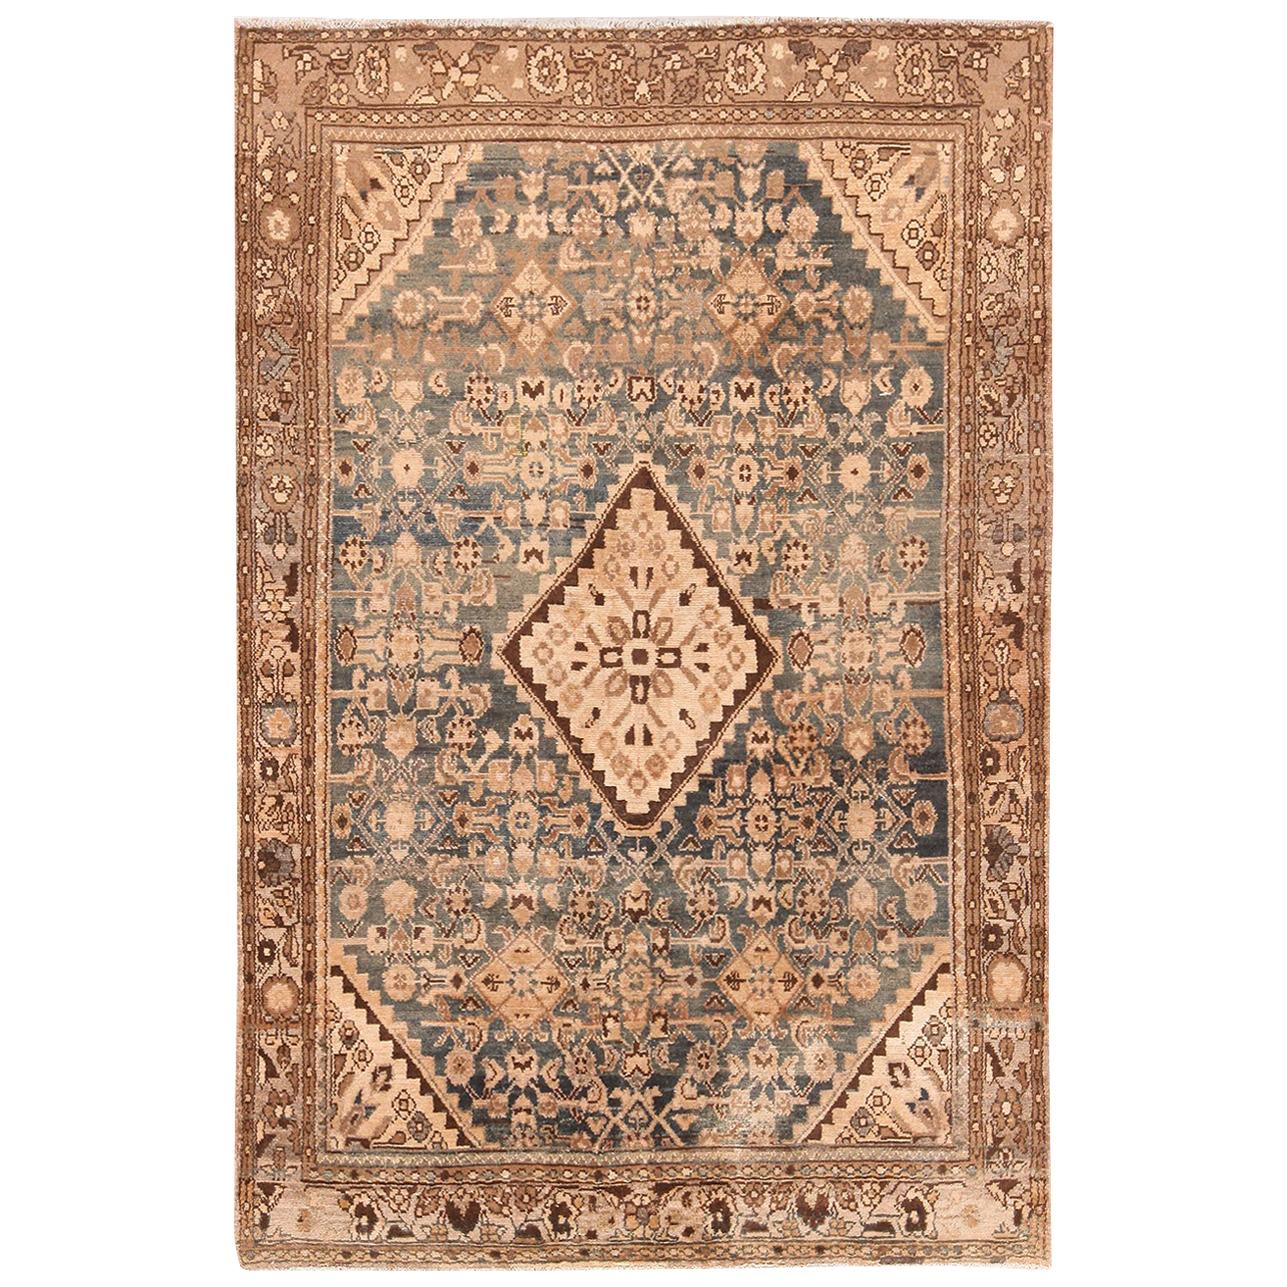 Small Size Antique Persian Malayer Rug. Size: 4 ft x 6 ft 3 in